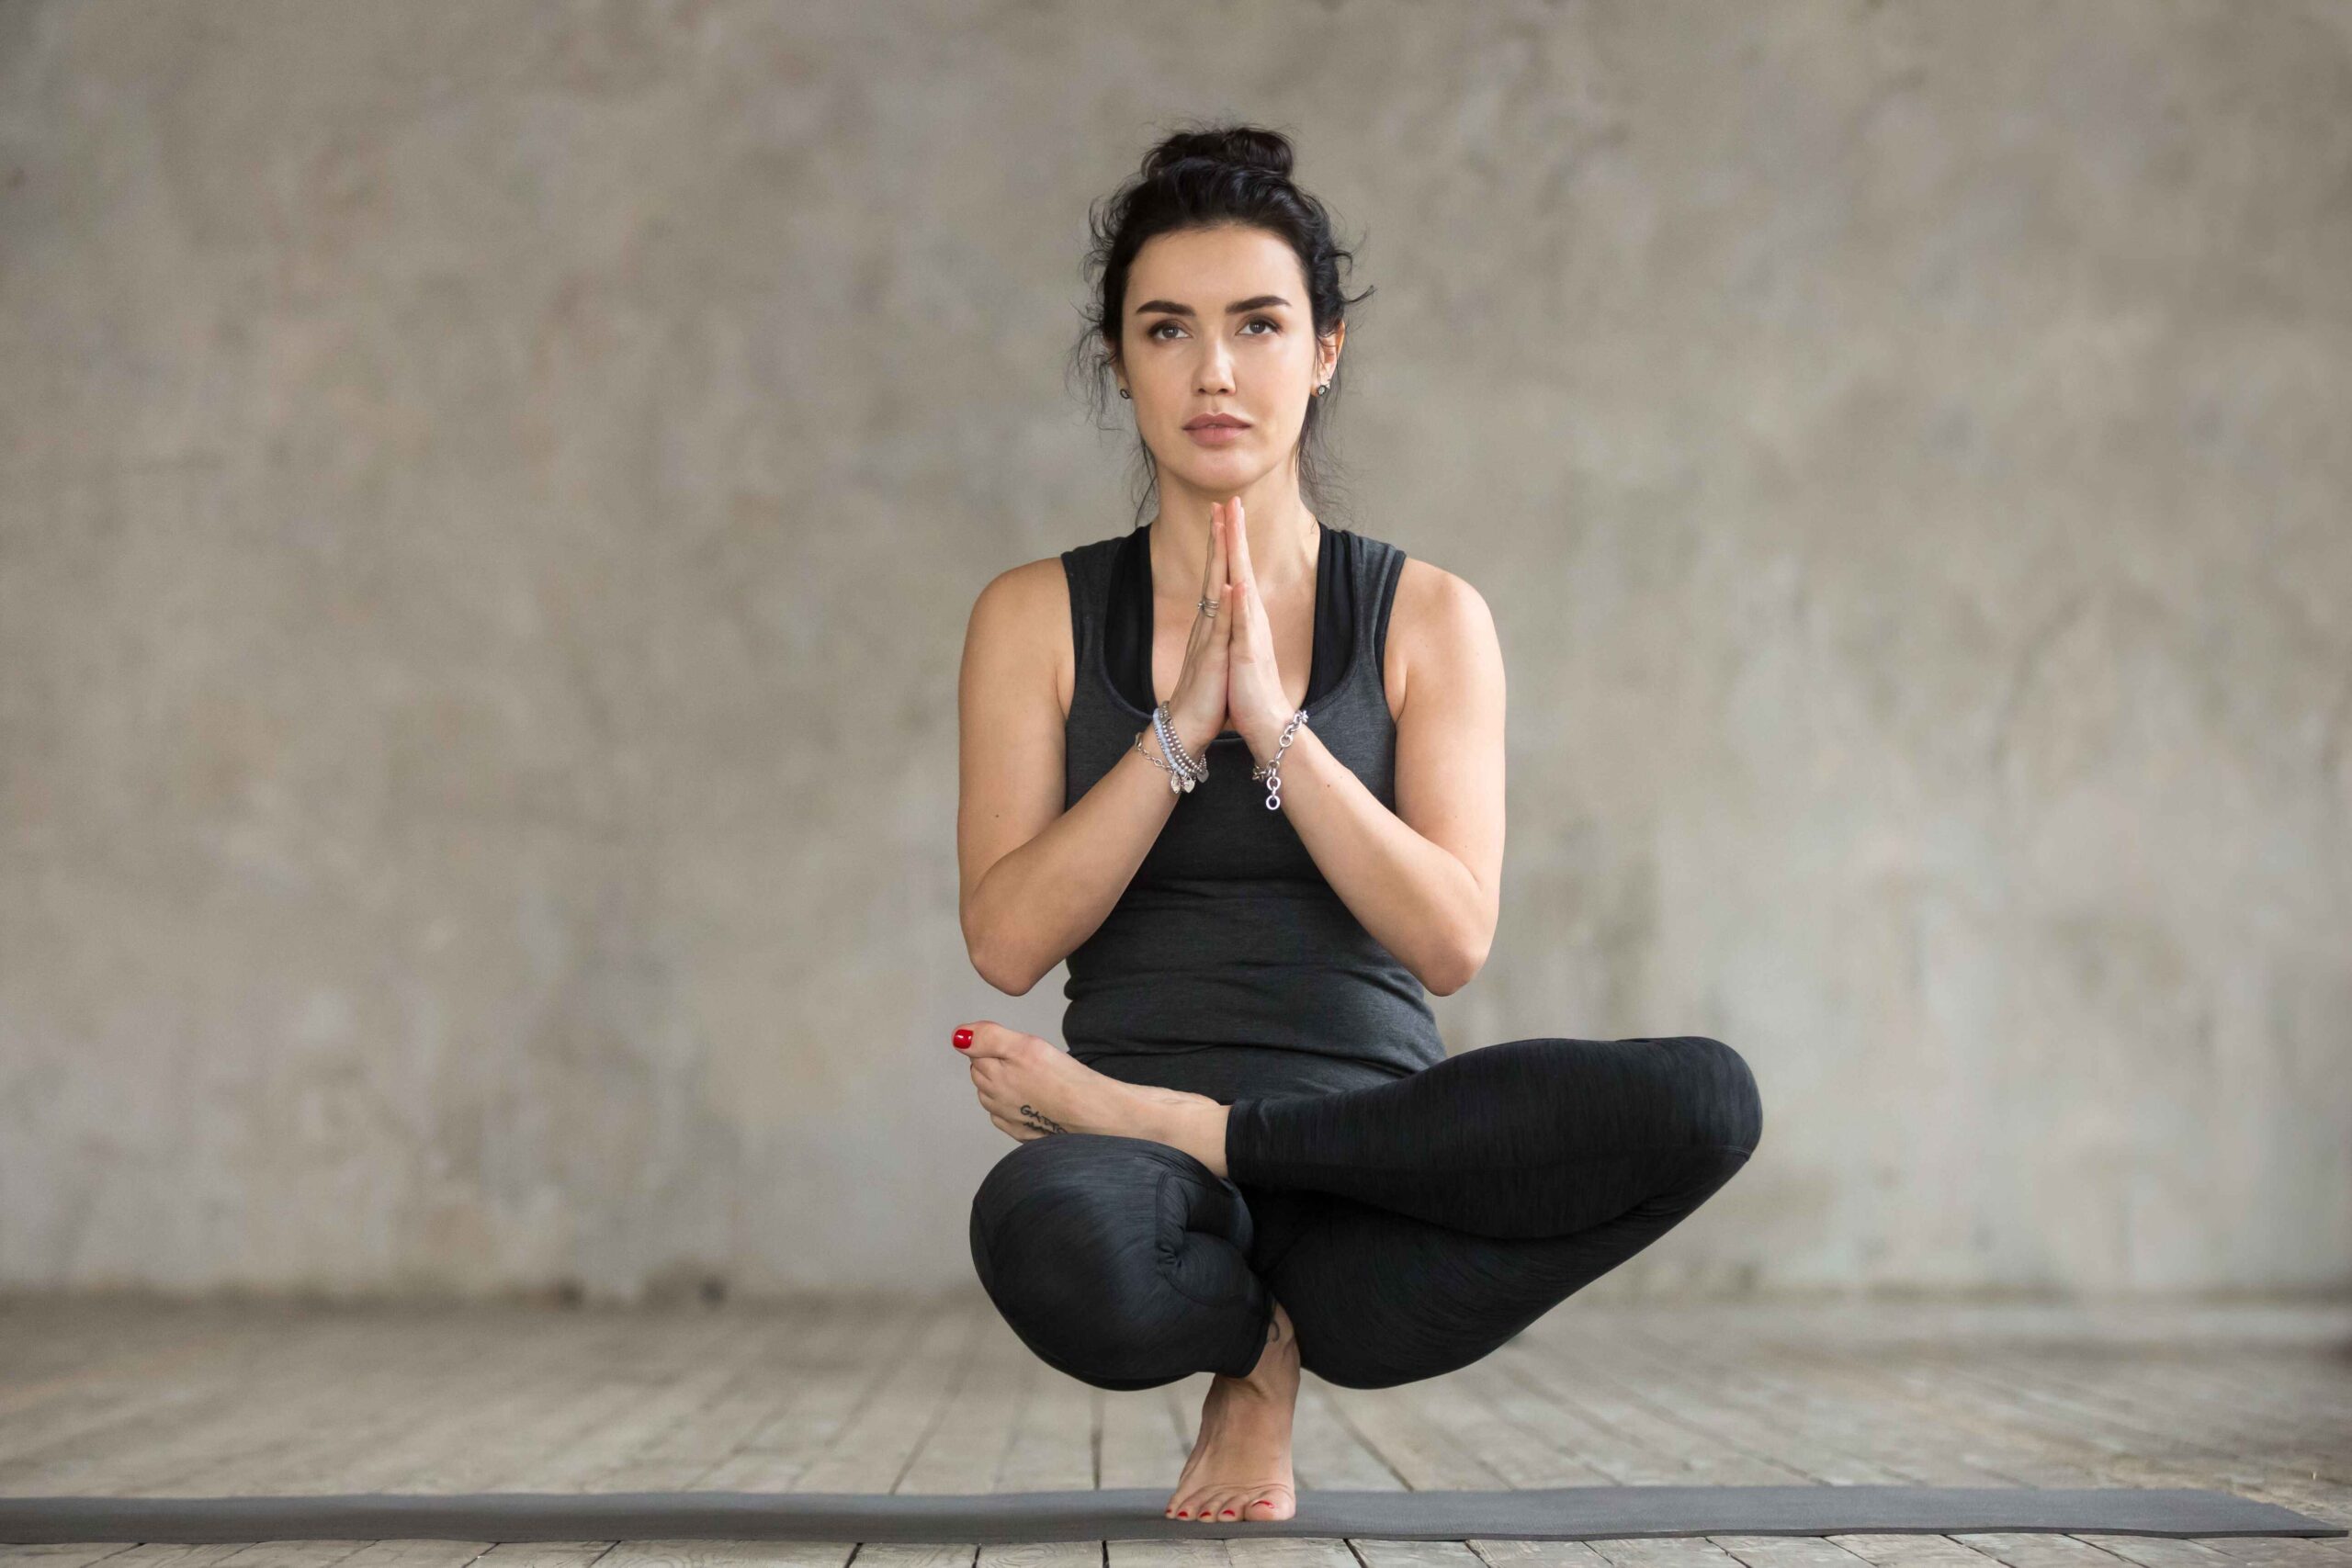 HOW YOGA CAN TRANSFORM YOUR MIND,BODY AND SPIRIT